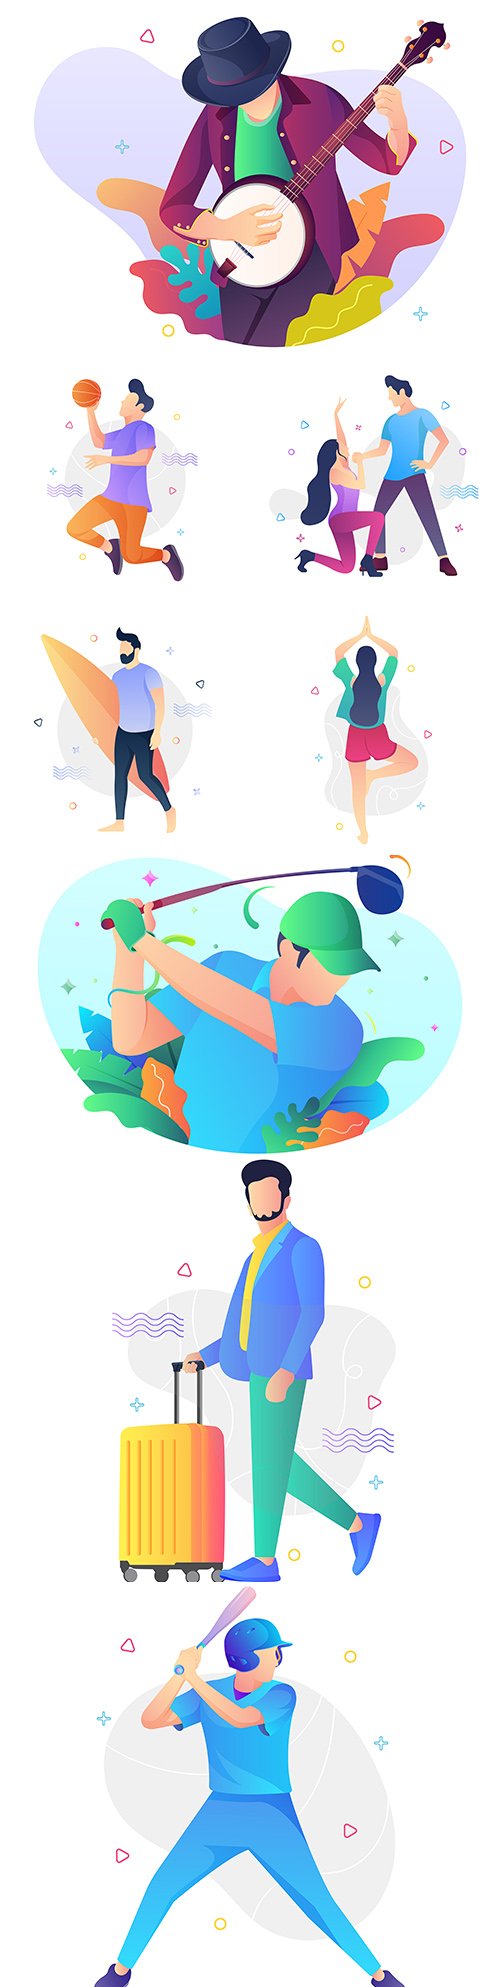 People and different lifestyles concept of illustration